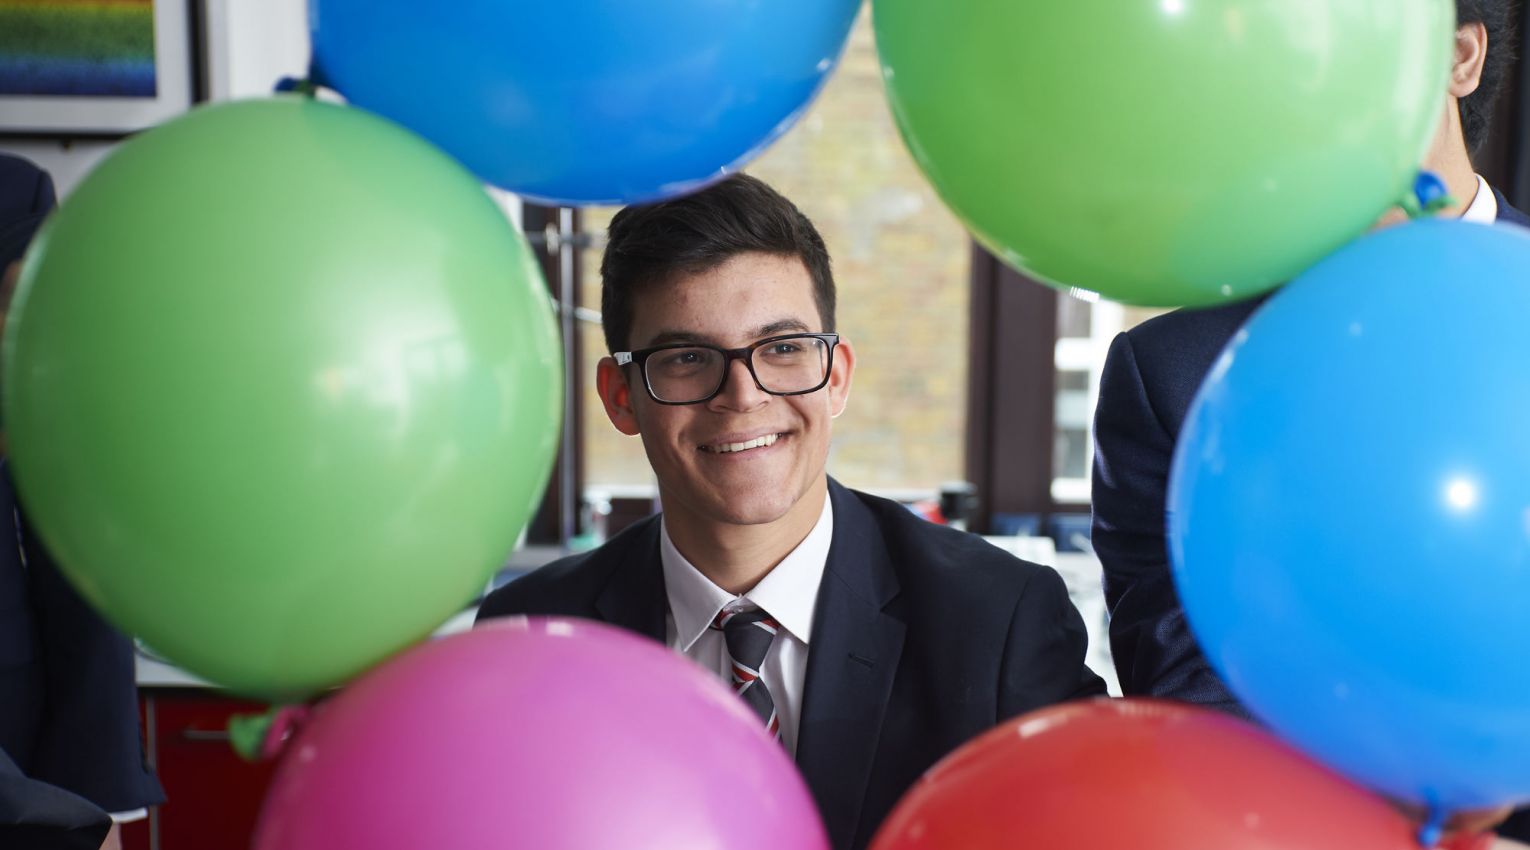 Student and balloons